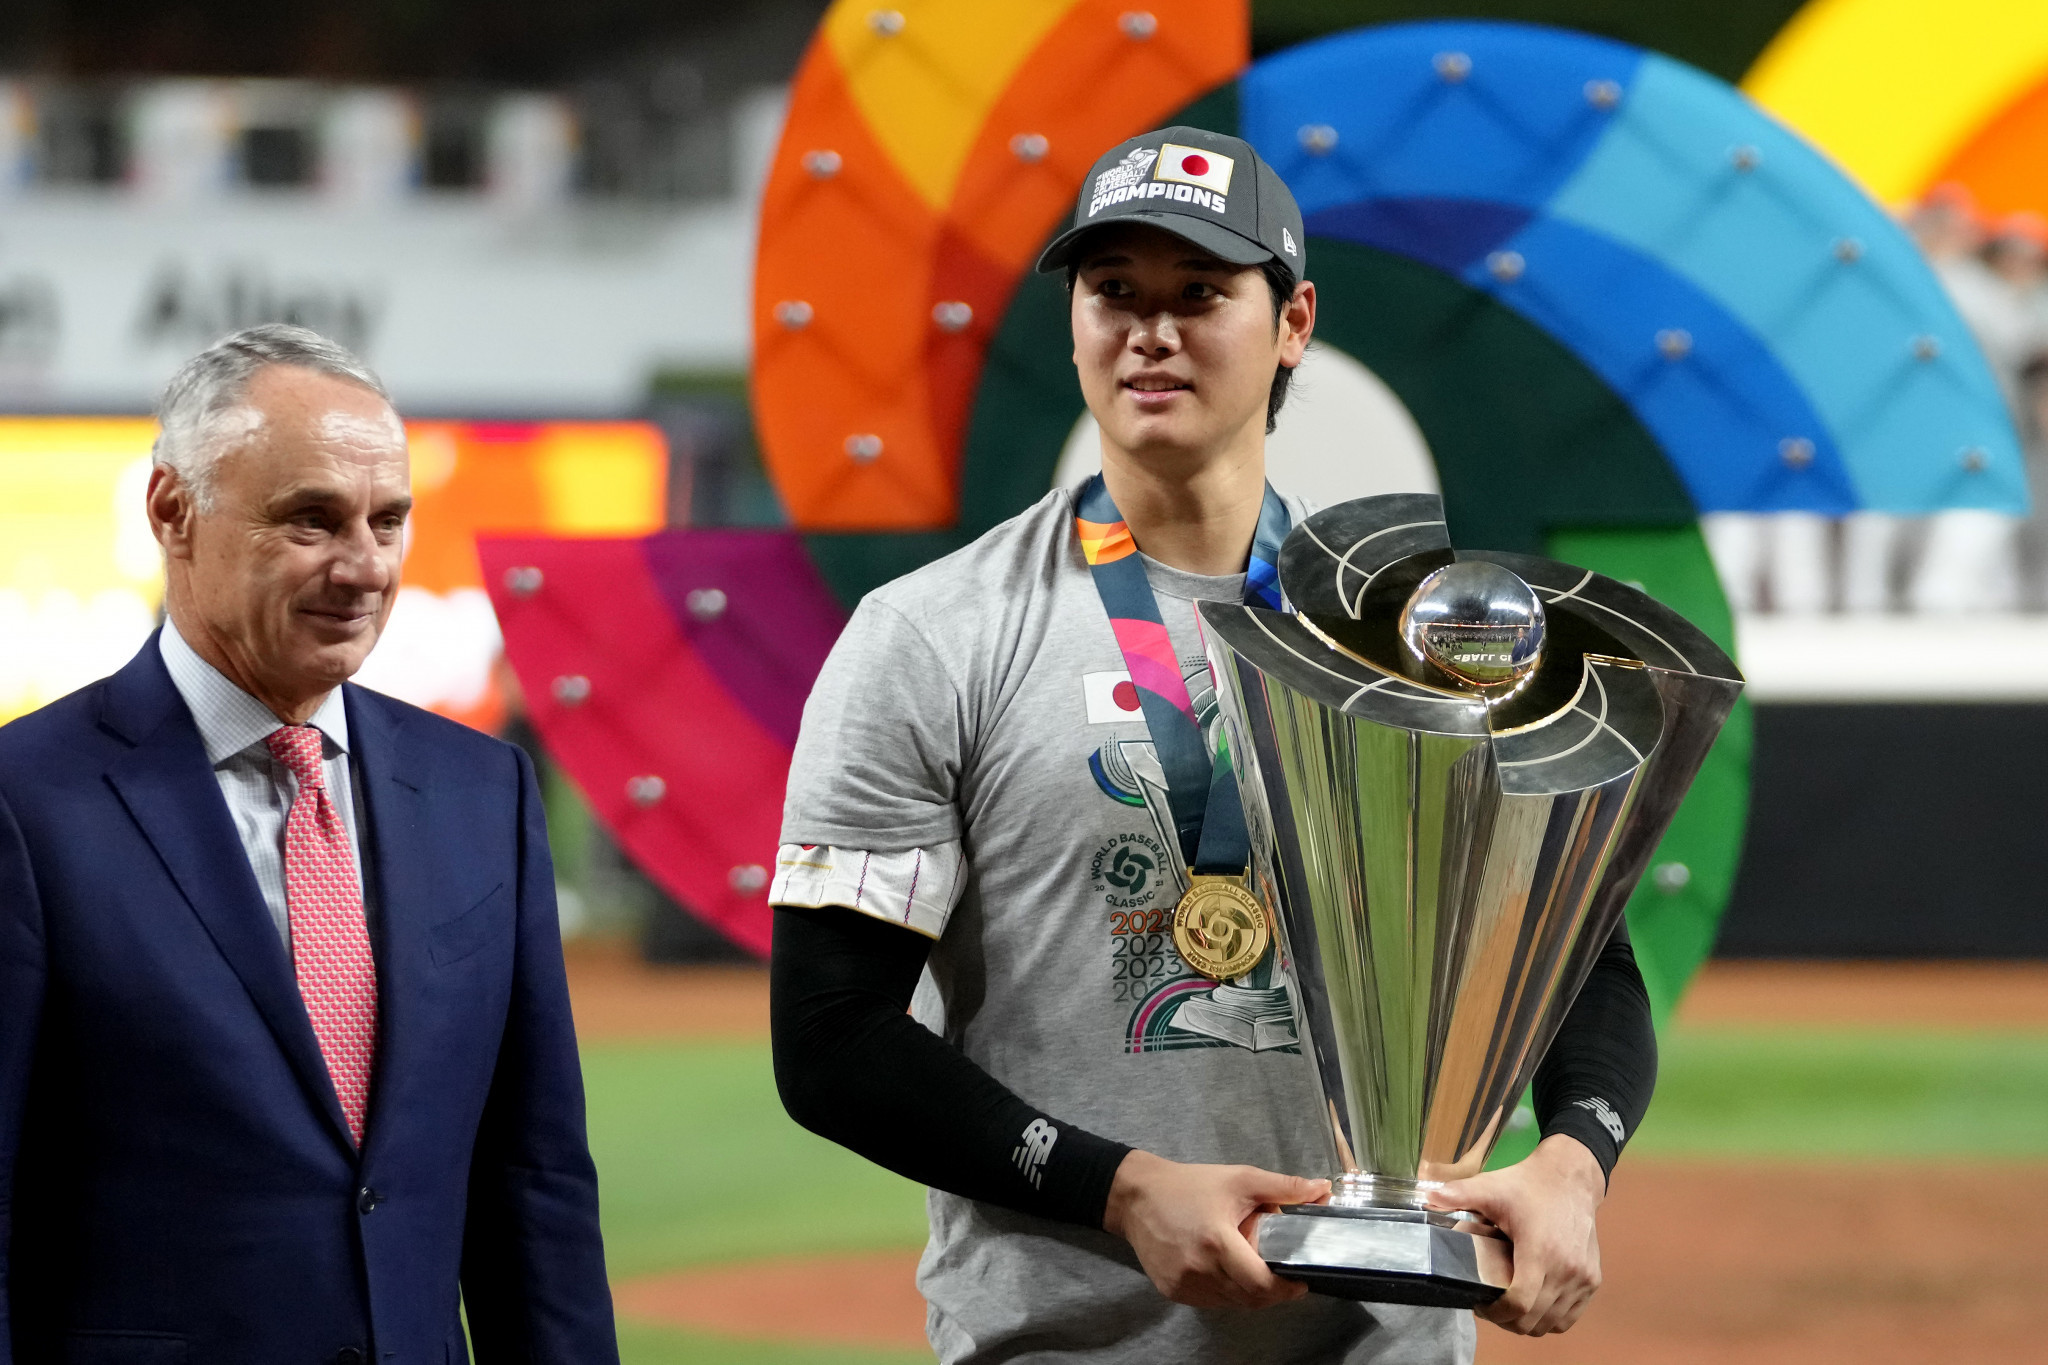 The cap belonging to Japan's Shohei Ohtani from the World Baseball Classic is now headed for display at the Hall of Fame and Museum in Cooperstown ©Getty Images